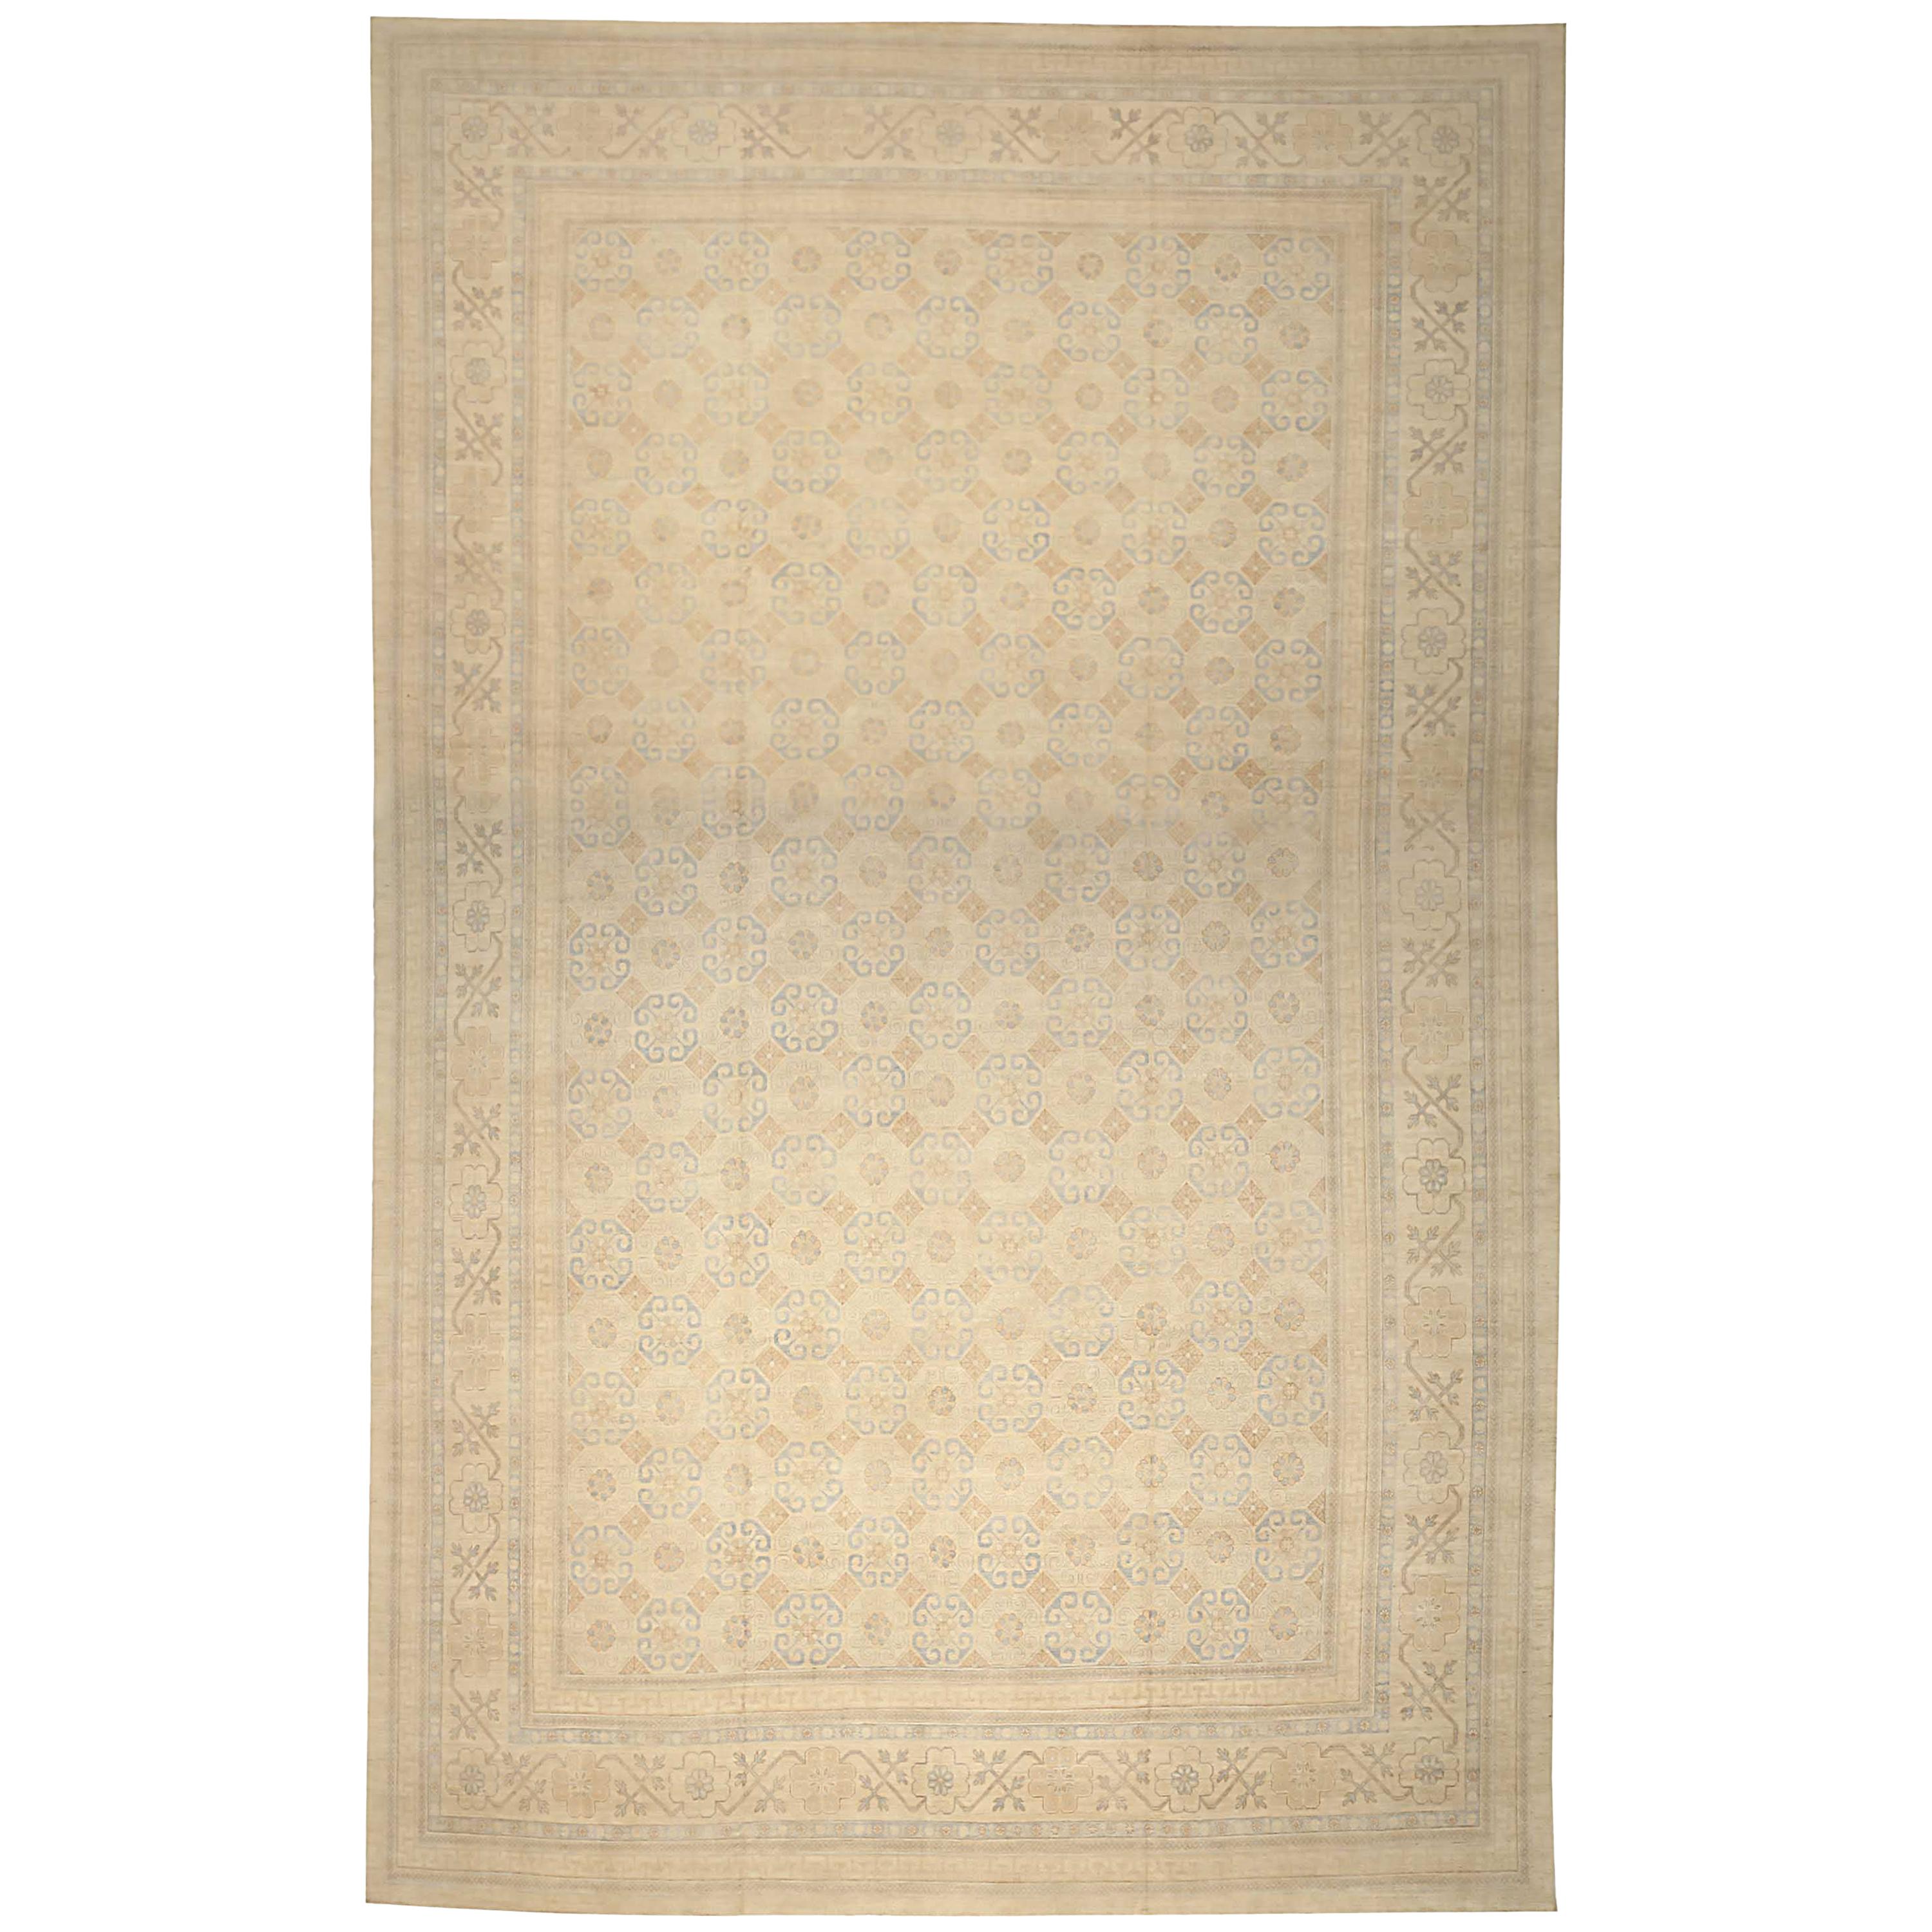 New Persian area rug handwoven from the finest sheep’s wool. It’s colored with all-natural vegetable dyes that are safe for humans and pets. It’s a traditional Khotan design handwoven by expert artisans. It’s a lovely area rug that can be